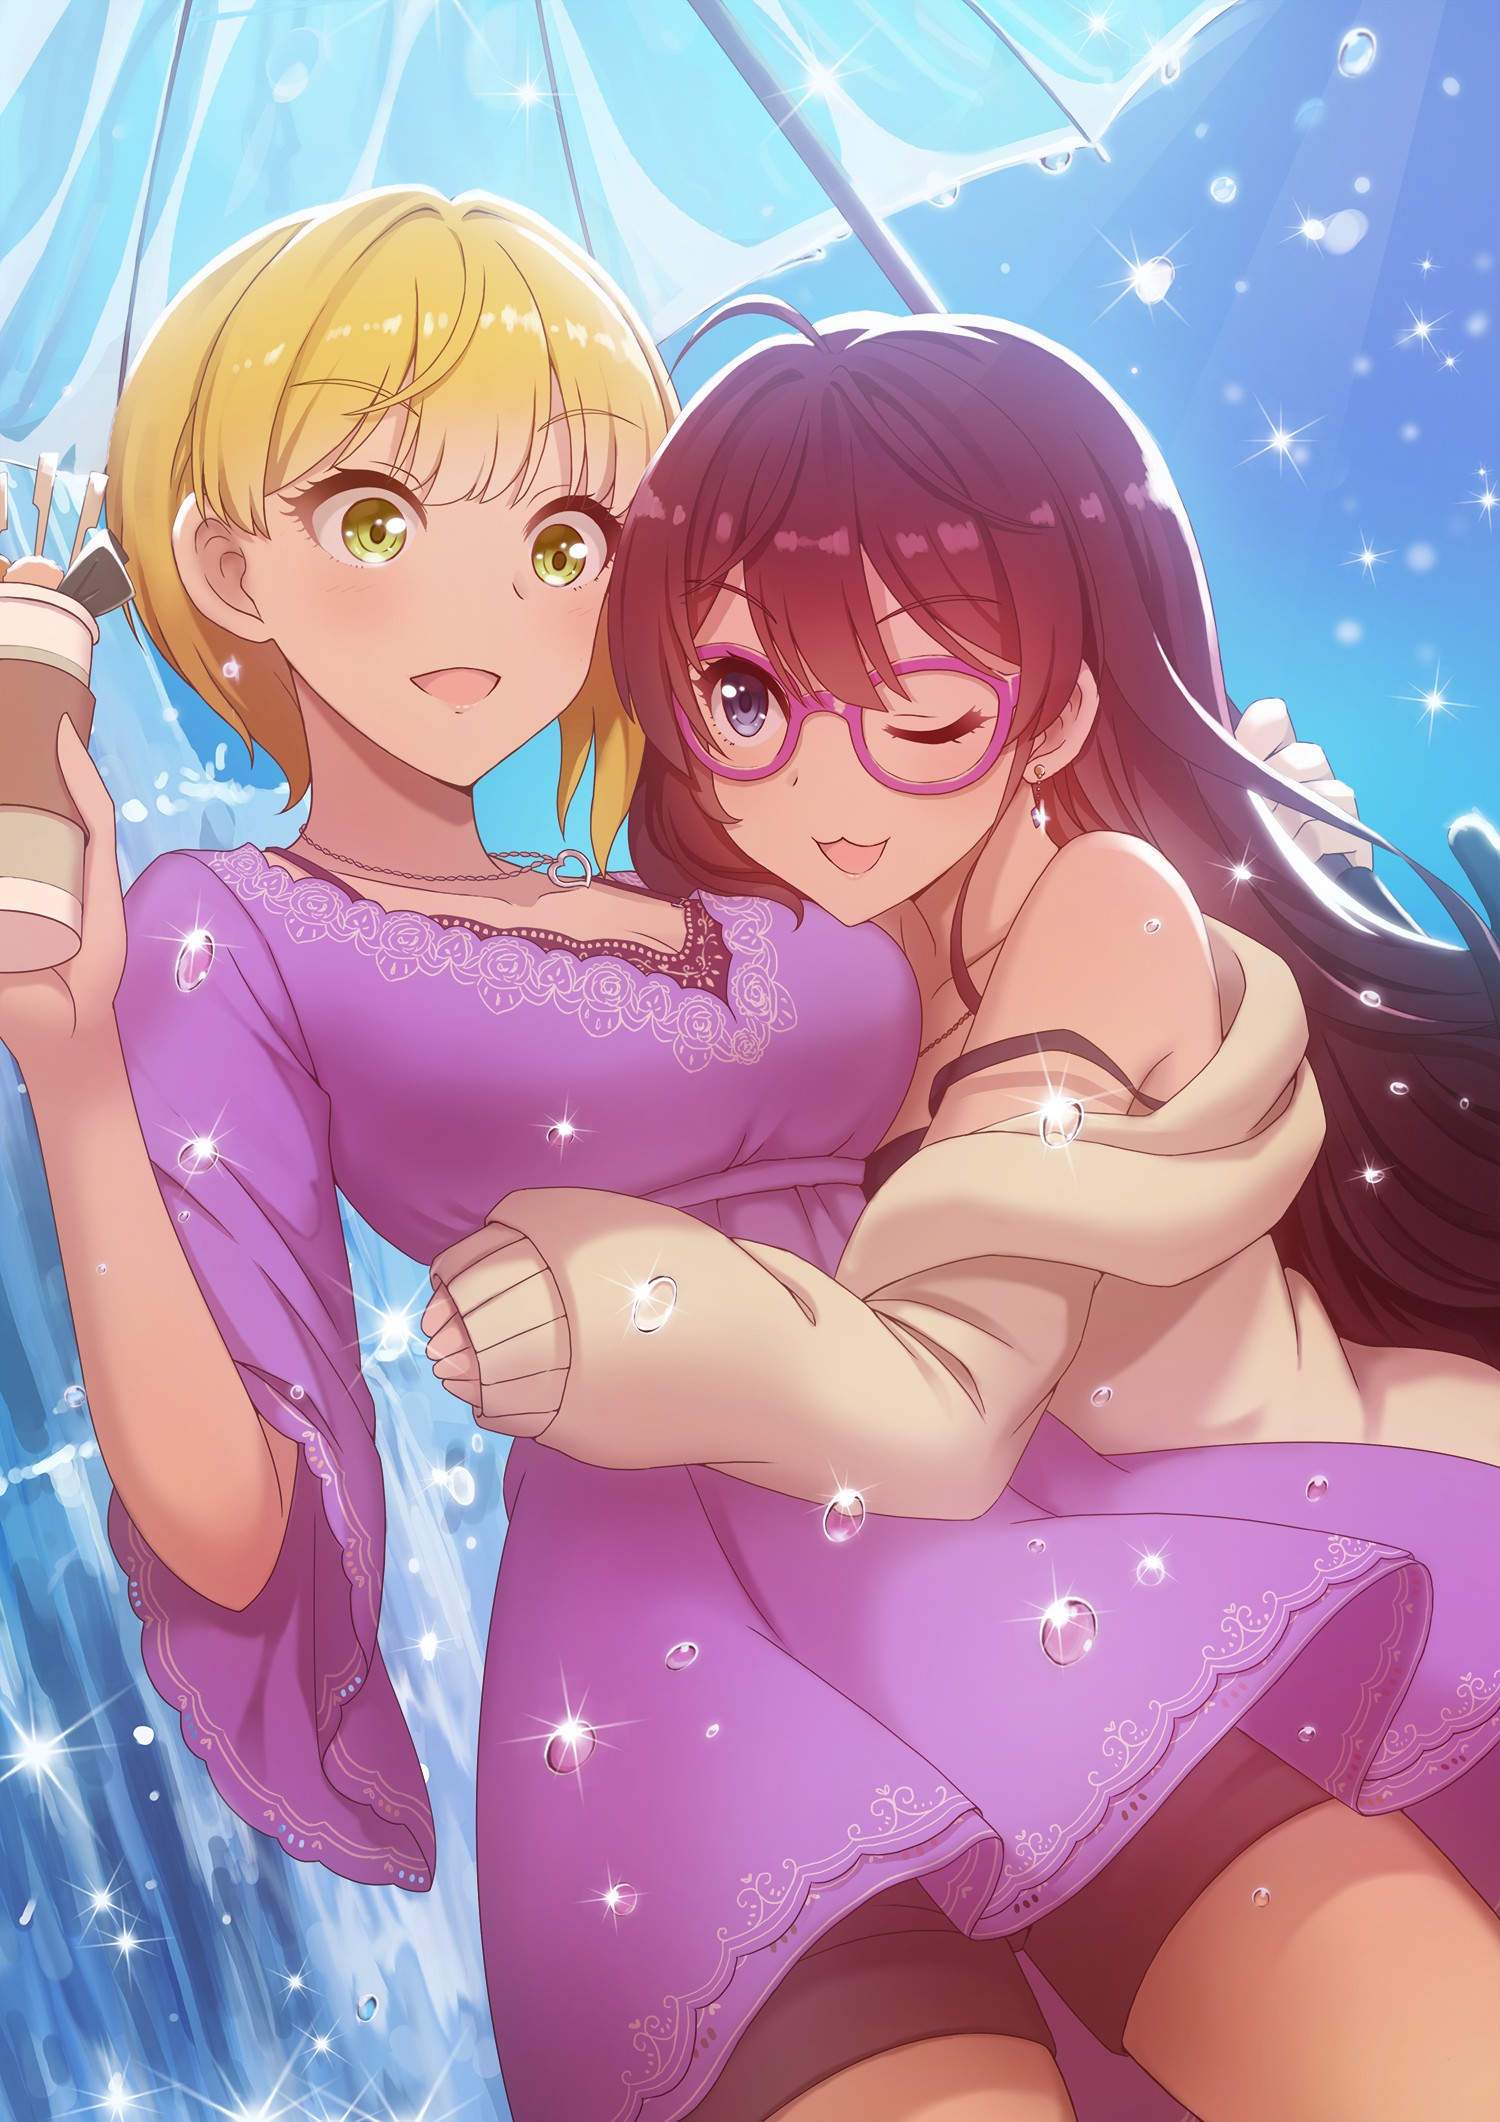 Anime 1500x2122 anime girls THE iDOLM@STER THE iDOLM@STER: Cinderella Girls bra cleavage dress open shirt sweater umbrella glasses short hair long hair blonde brunette green eyes blue eyes two women one eye closed hugging Pixiv food sweets surprised women with glasses purple dress anime